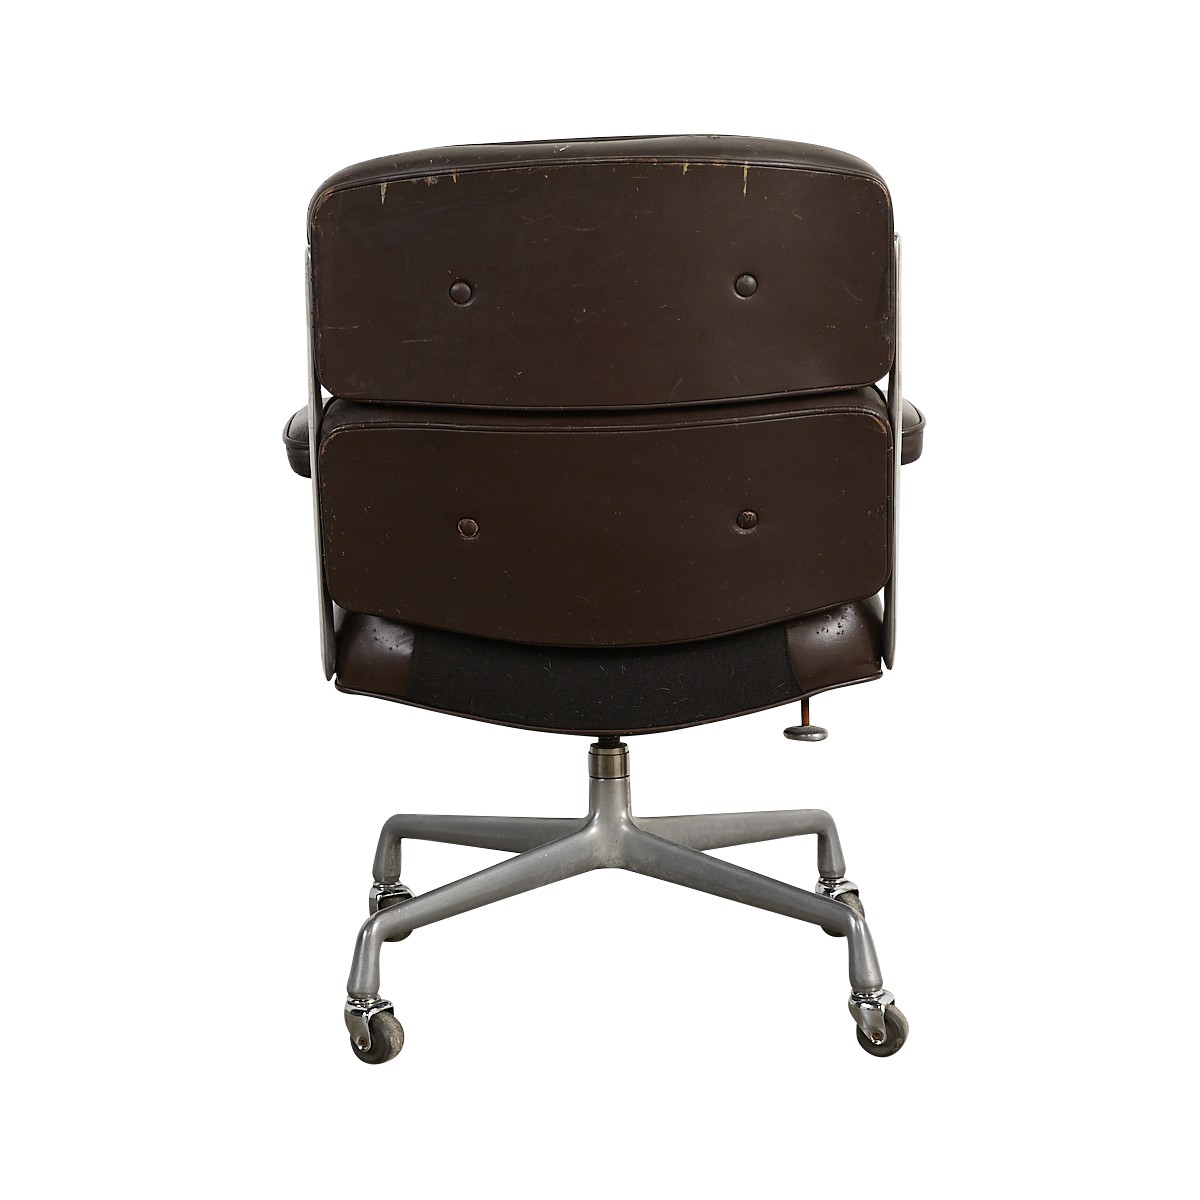 Eames Herman Miller Time Life Chair 1st Gen. - Image 5 of 14